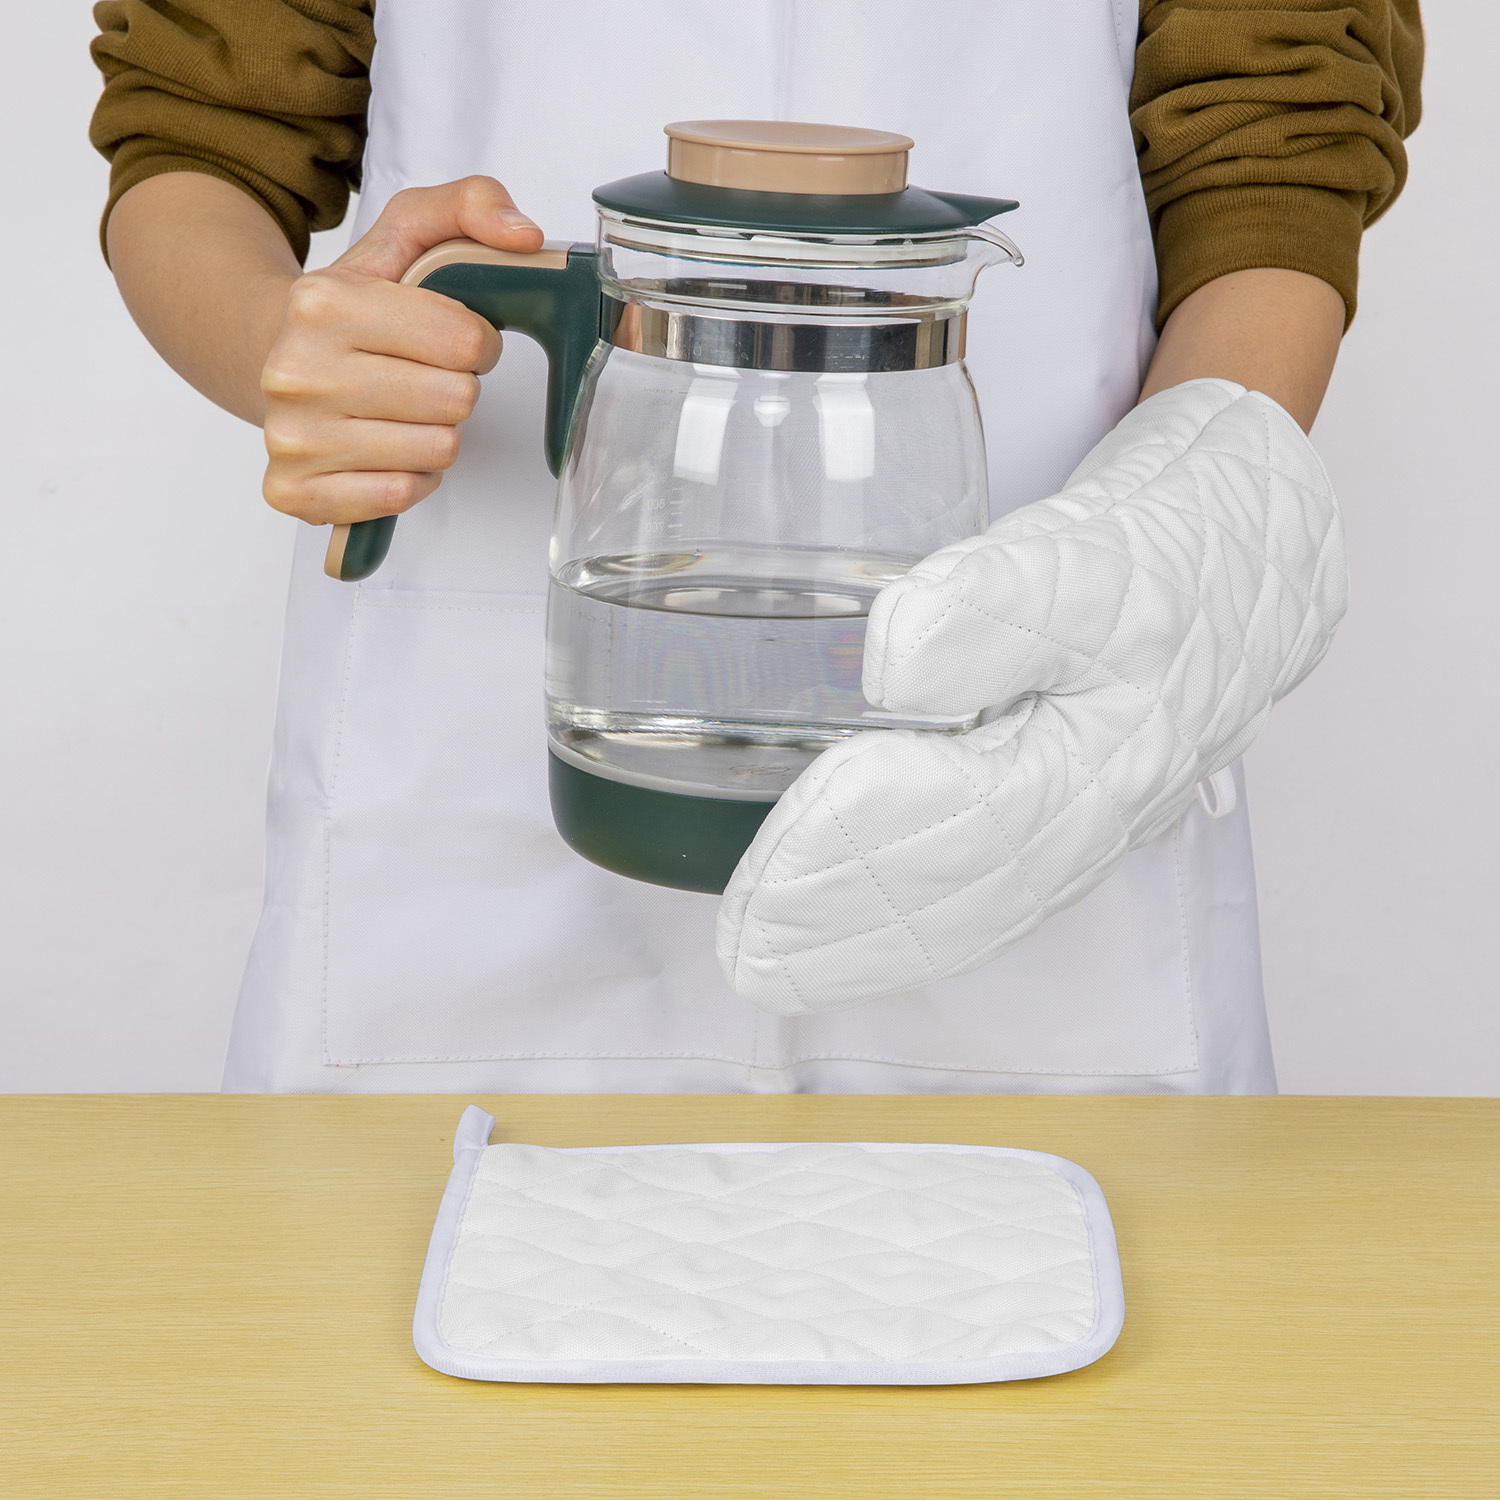 Microwave Oven Gloves & Insulation Pad | HugePOD-5